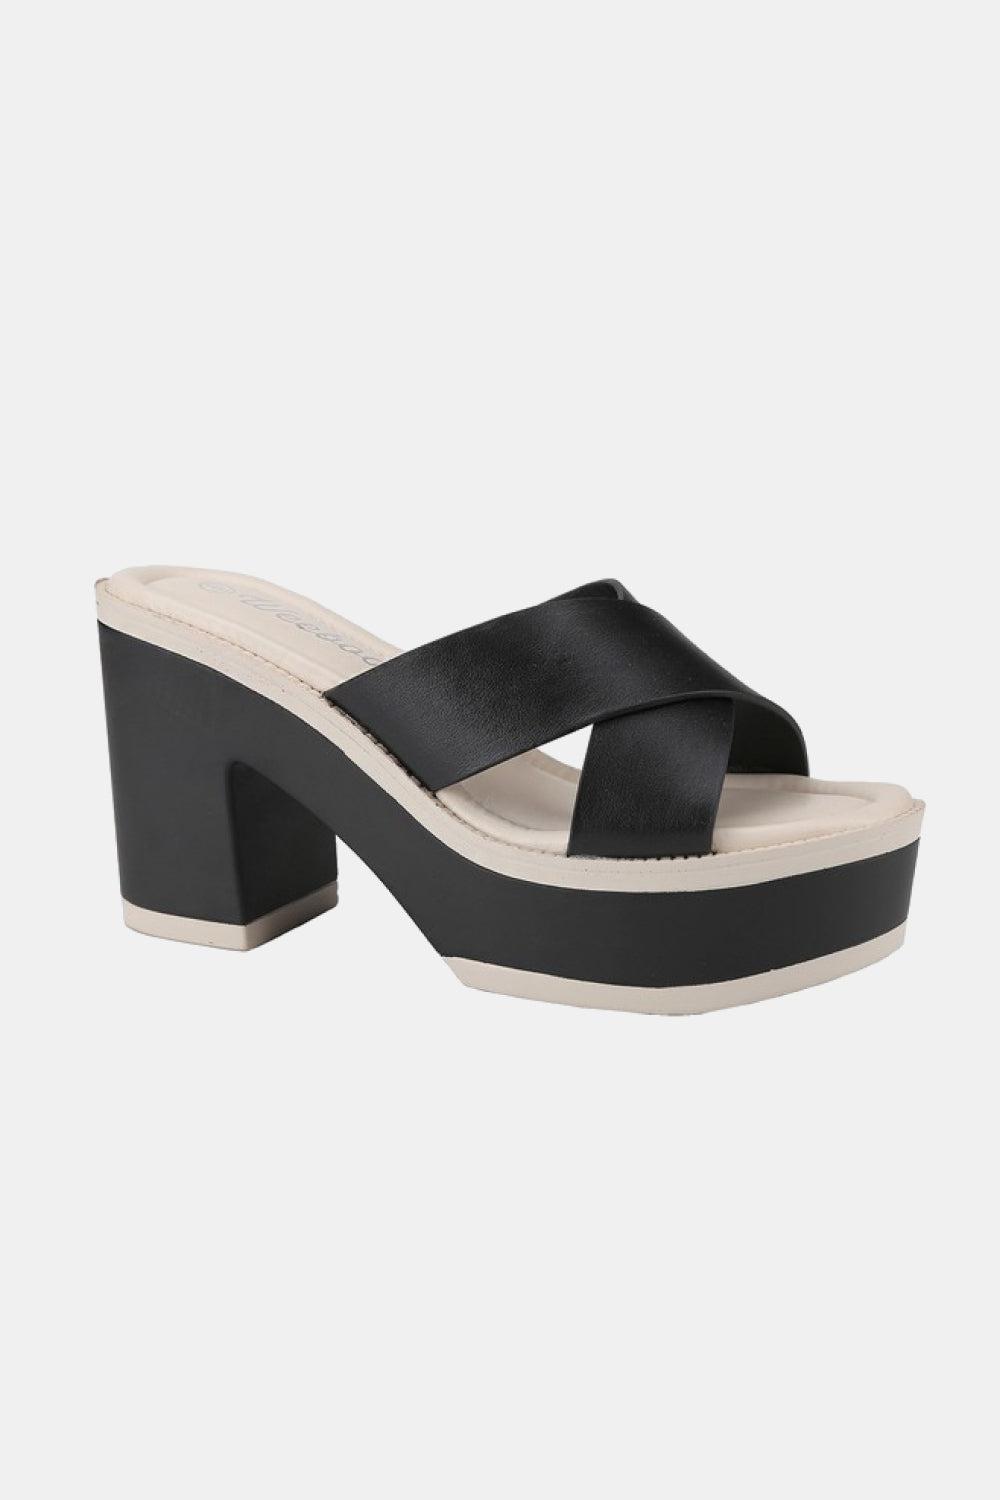 Weeboo Cherish The Moments Contrast Platform Sandals in Black BLUE ZONE PLANET